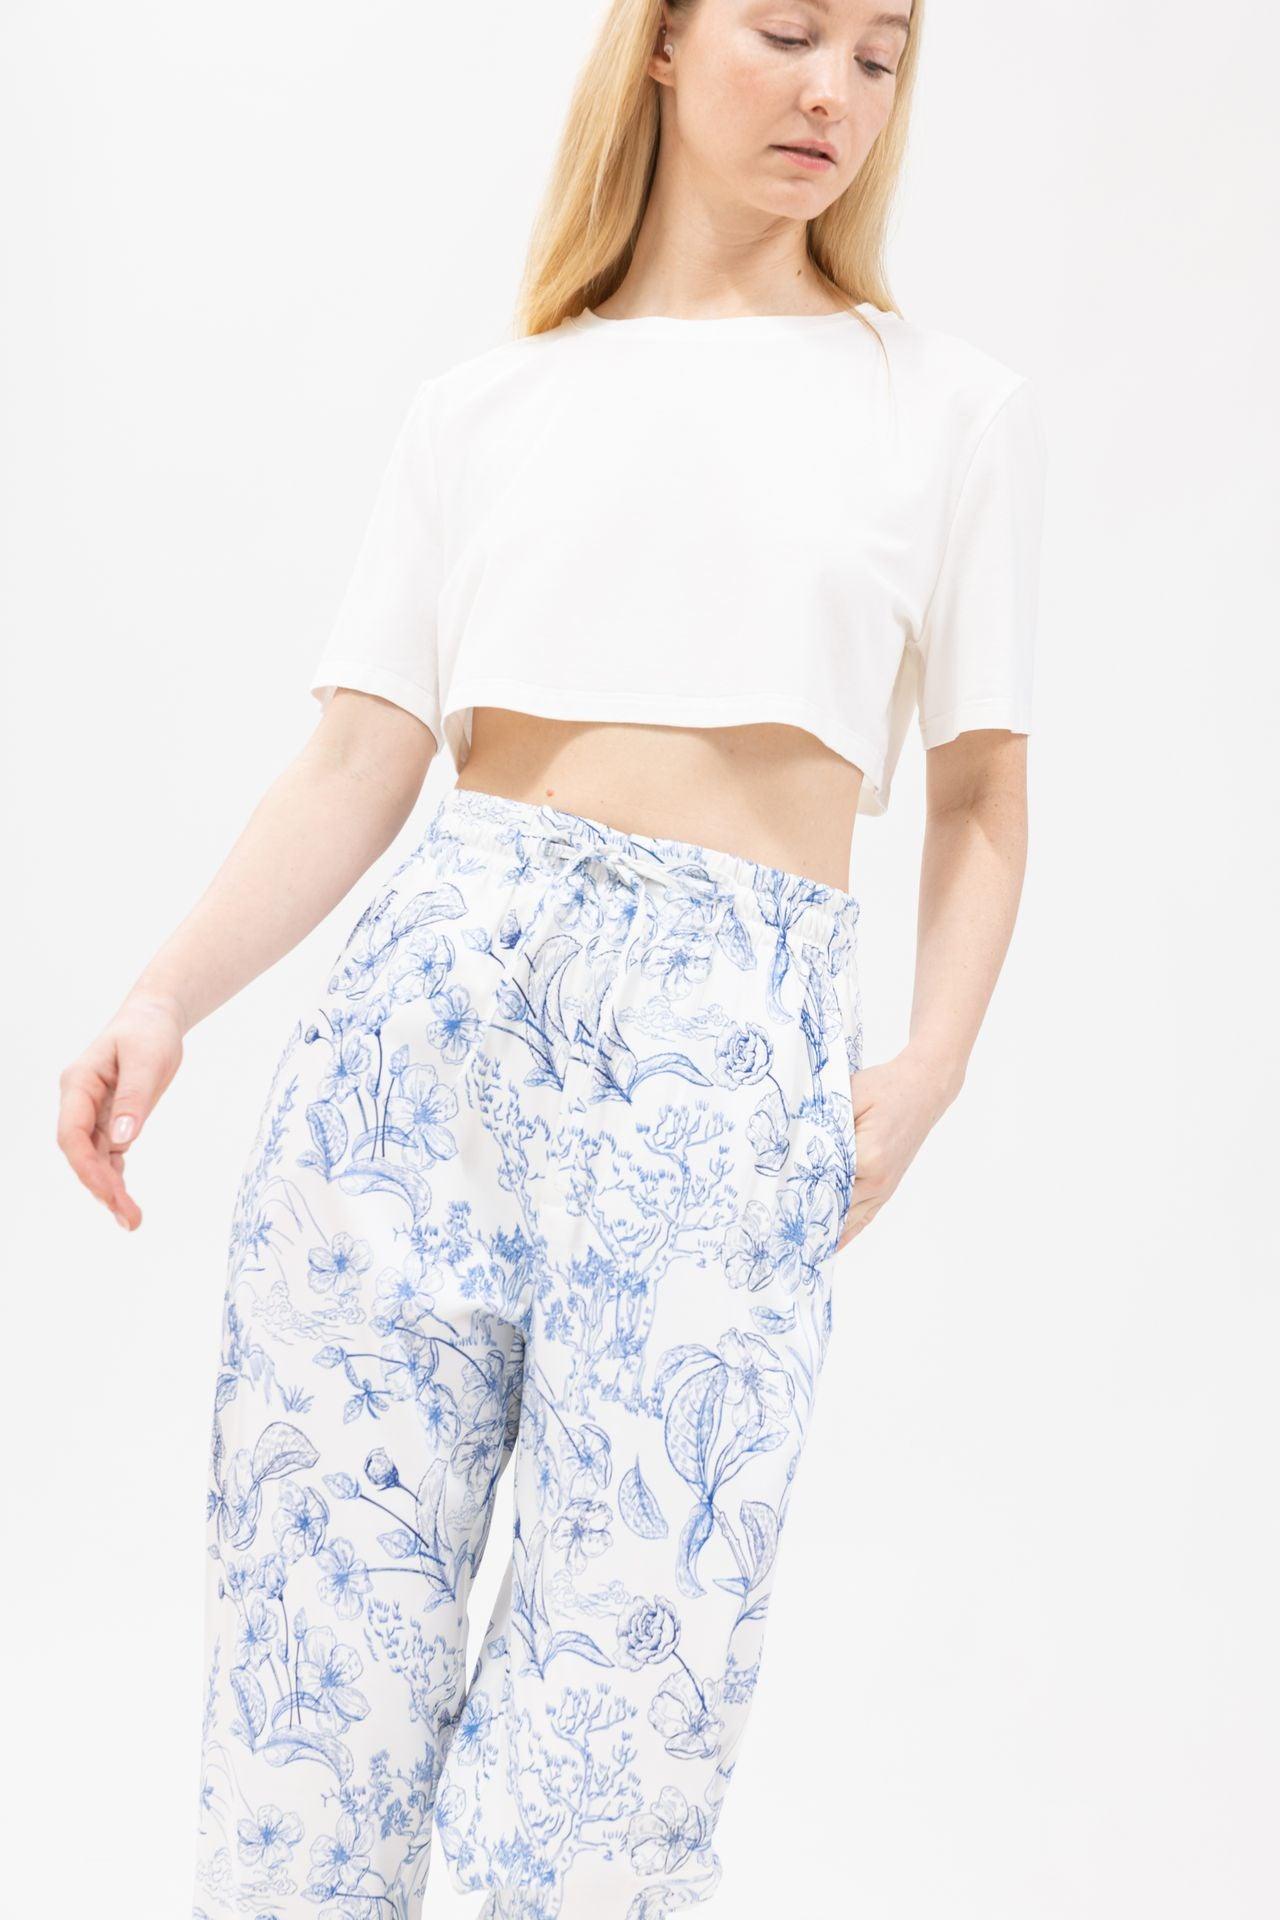 Relax Patterned Pants